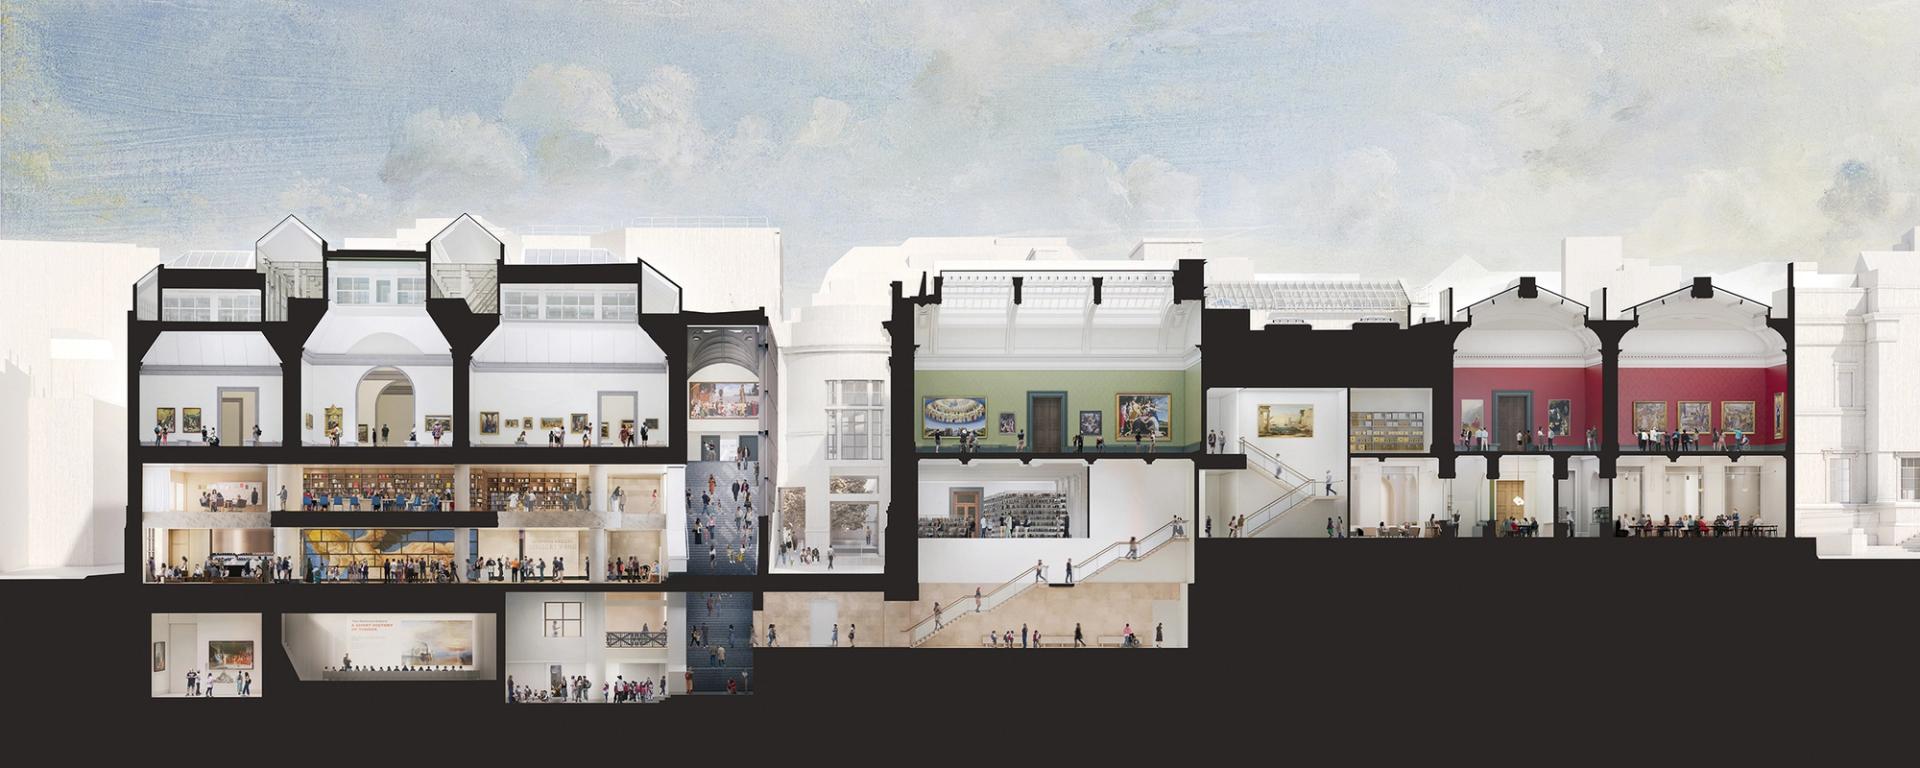 The National Gallery has gained planning permission to turn the Sainsbury Wing (left-hand portion of the image), one of the youngest Grade I-listed buildings in the UK, into the primary access point for the museum © Selldorf Architects